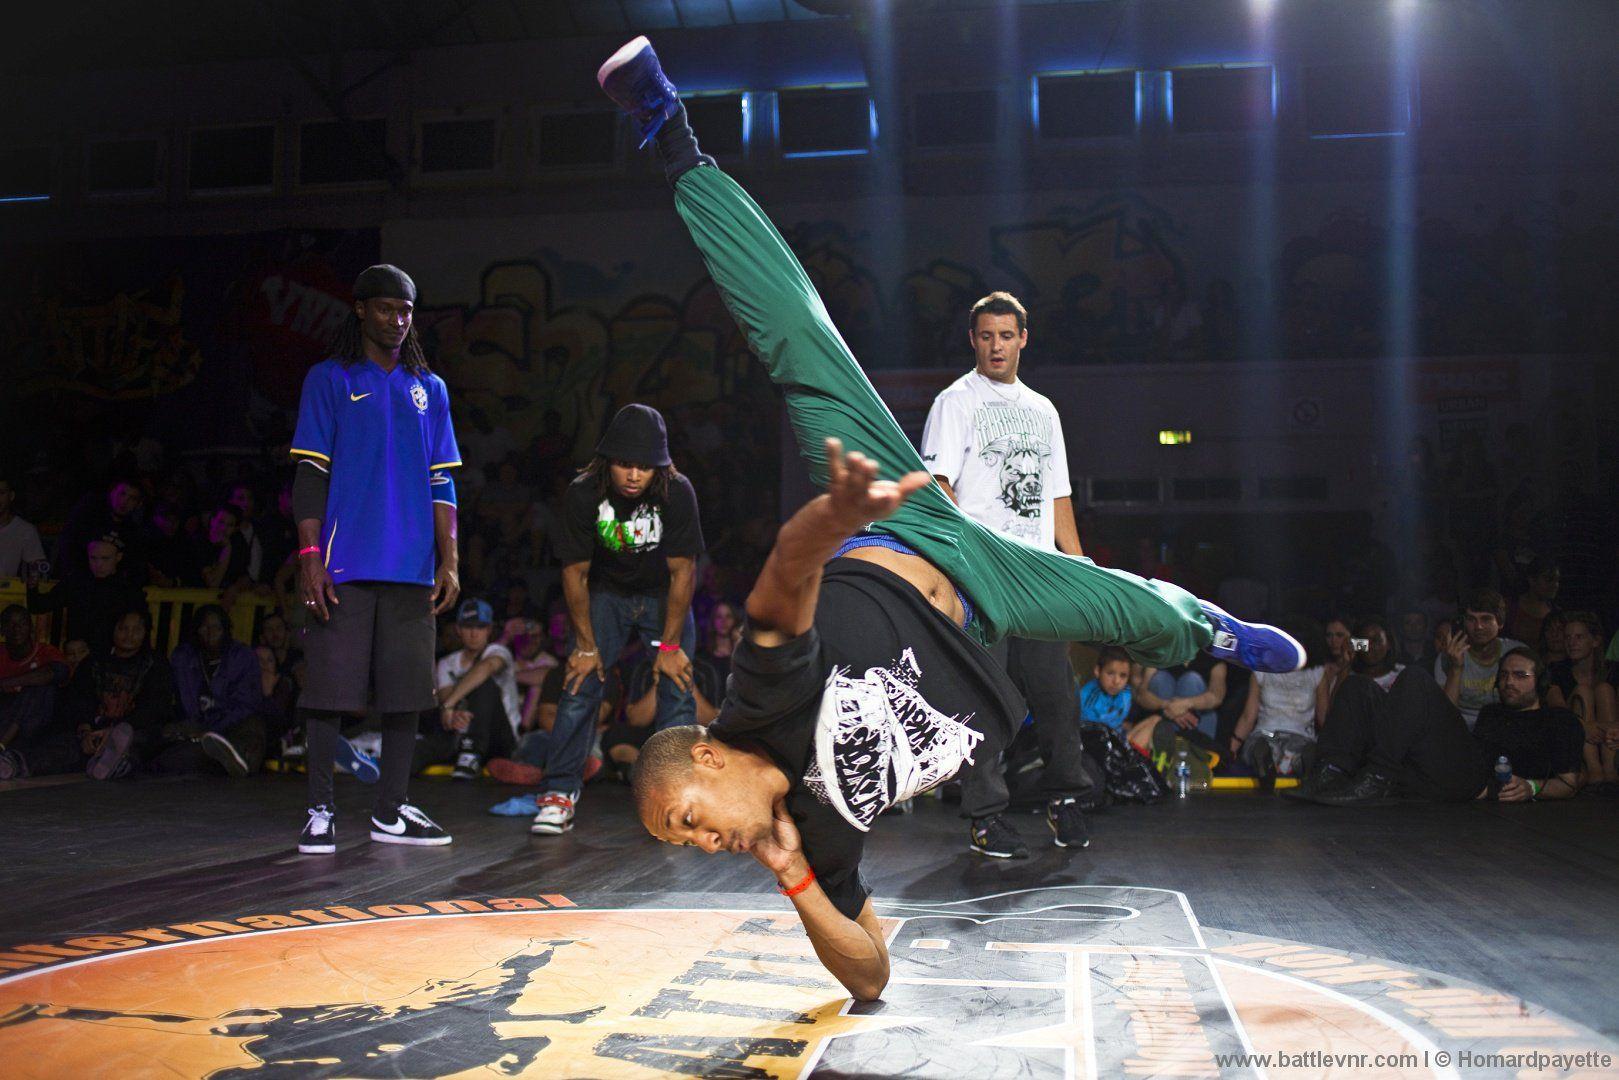 Breakdance by Homar Payette. Dance. Breakdance and Dancing